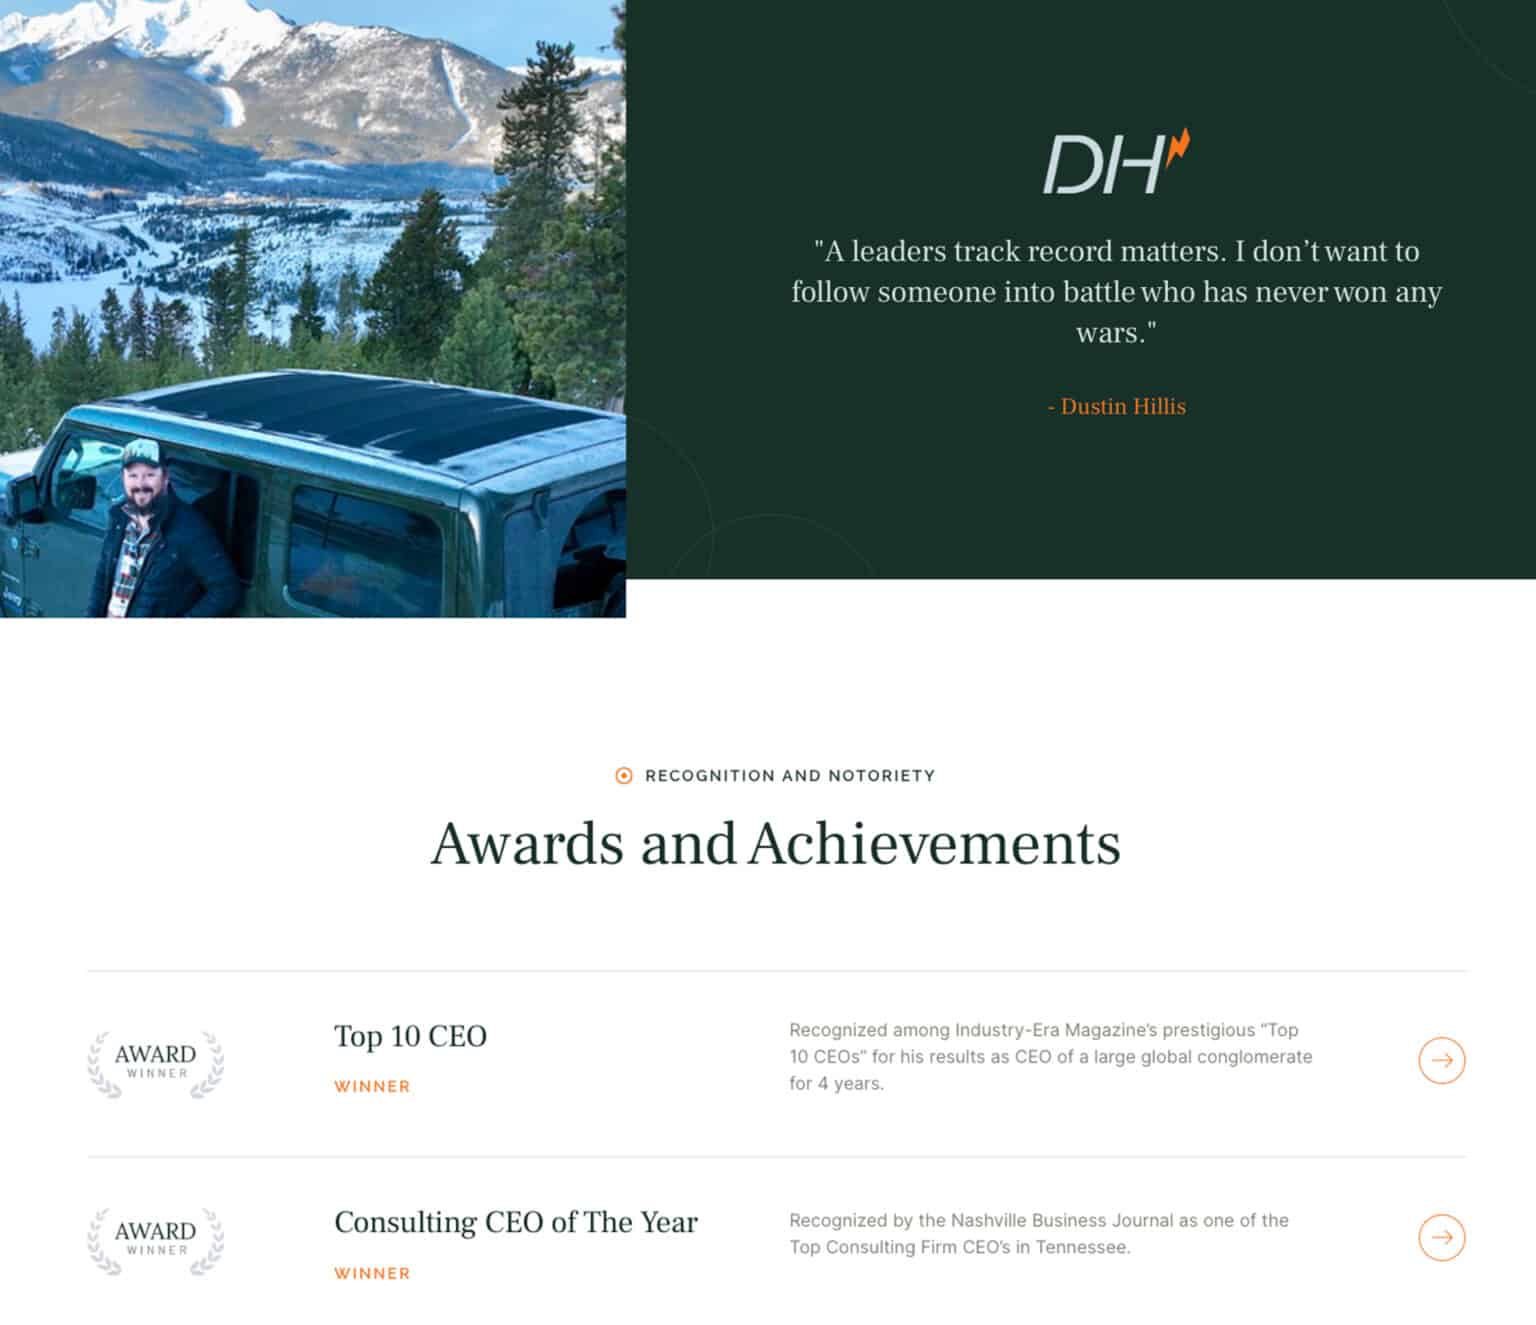 Dustin Hillis website section including the awards and achievements.